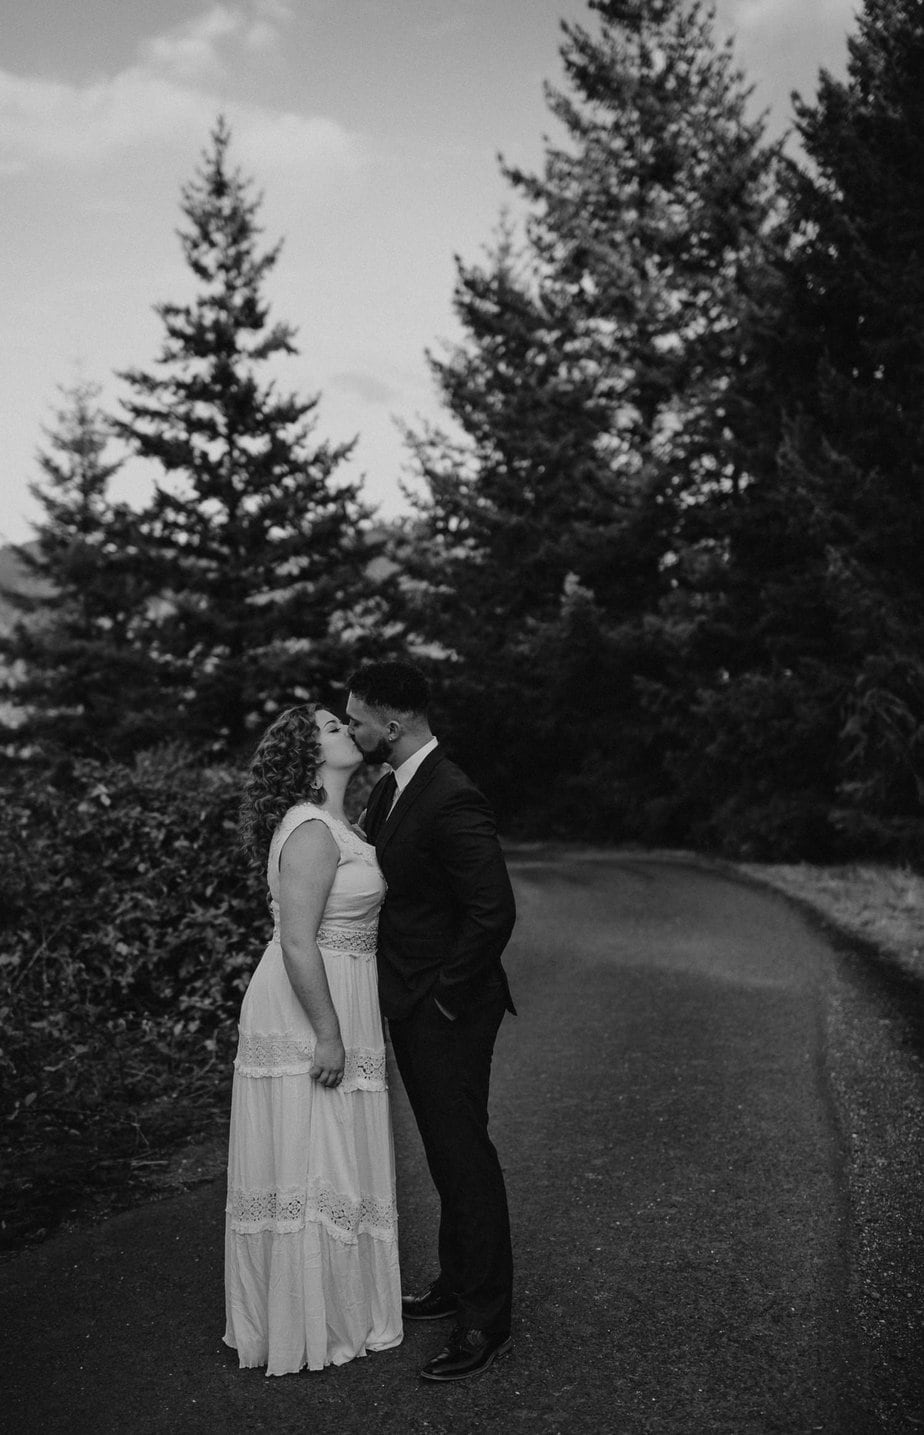 Black and white image of wedding couple kissing at Government Cove. Couple stands in pathway and the trees surround them.